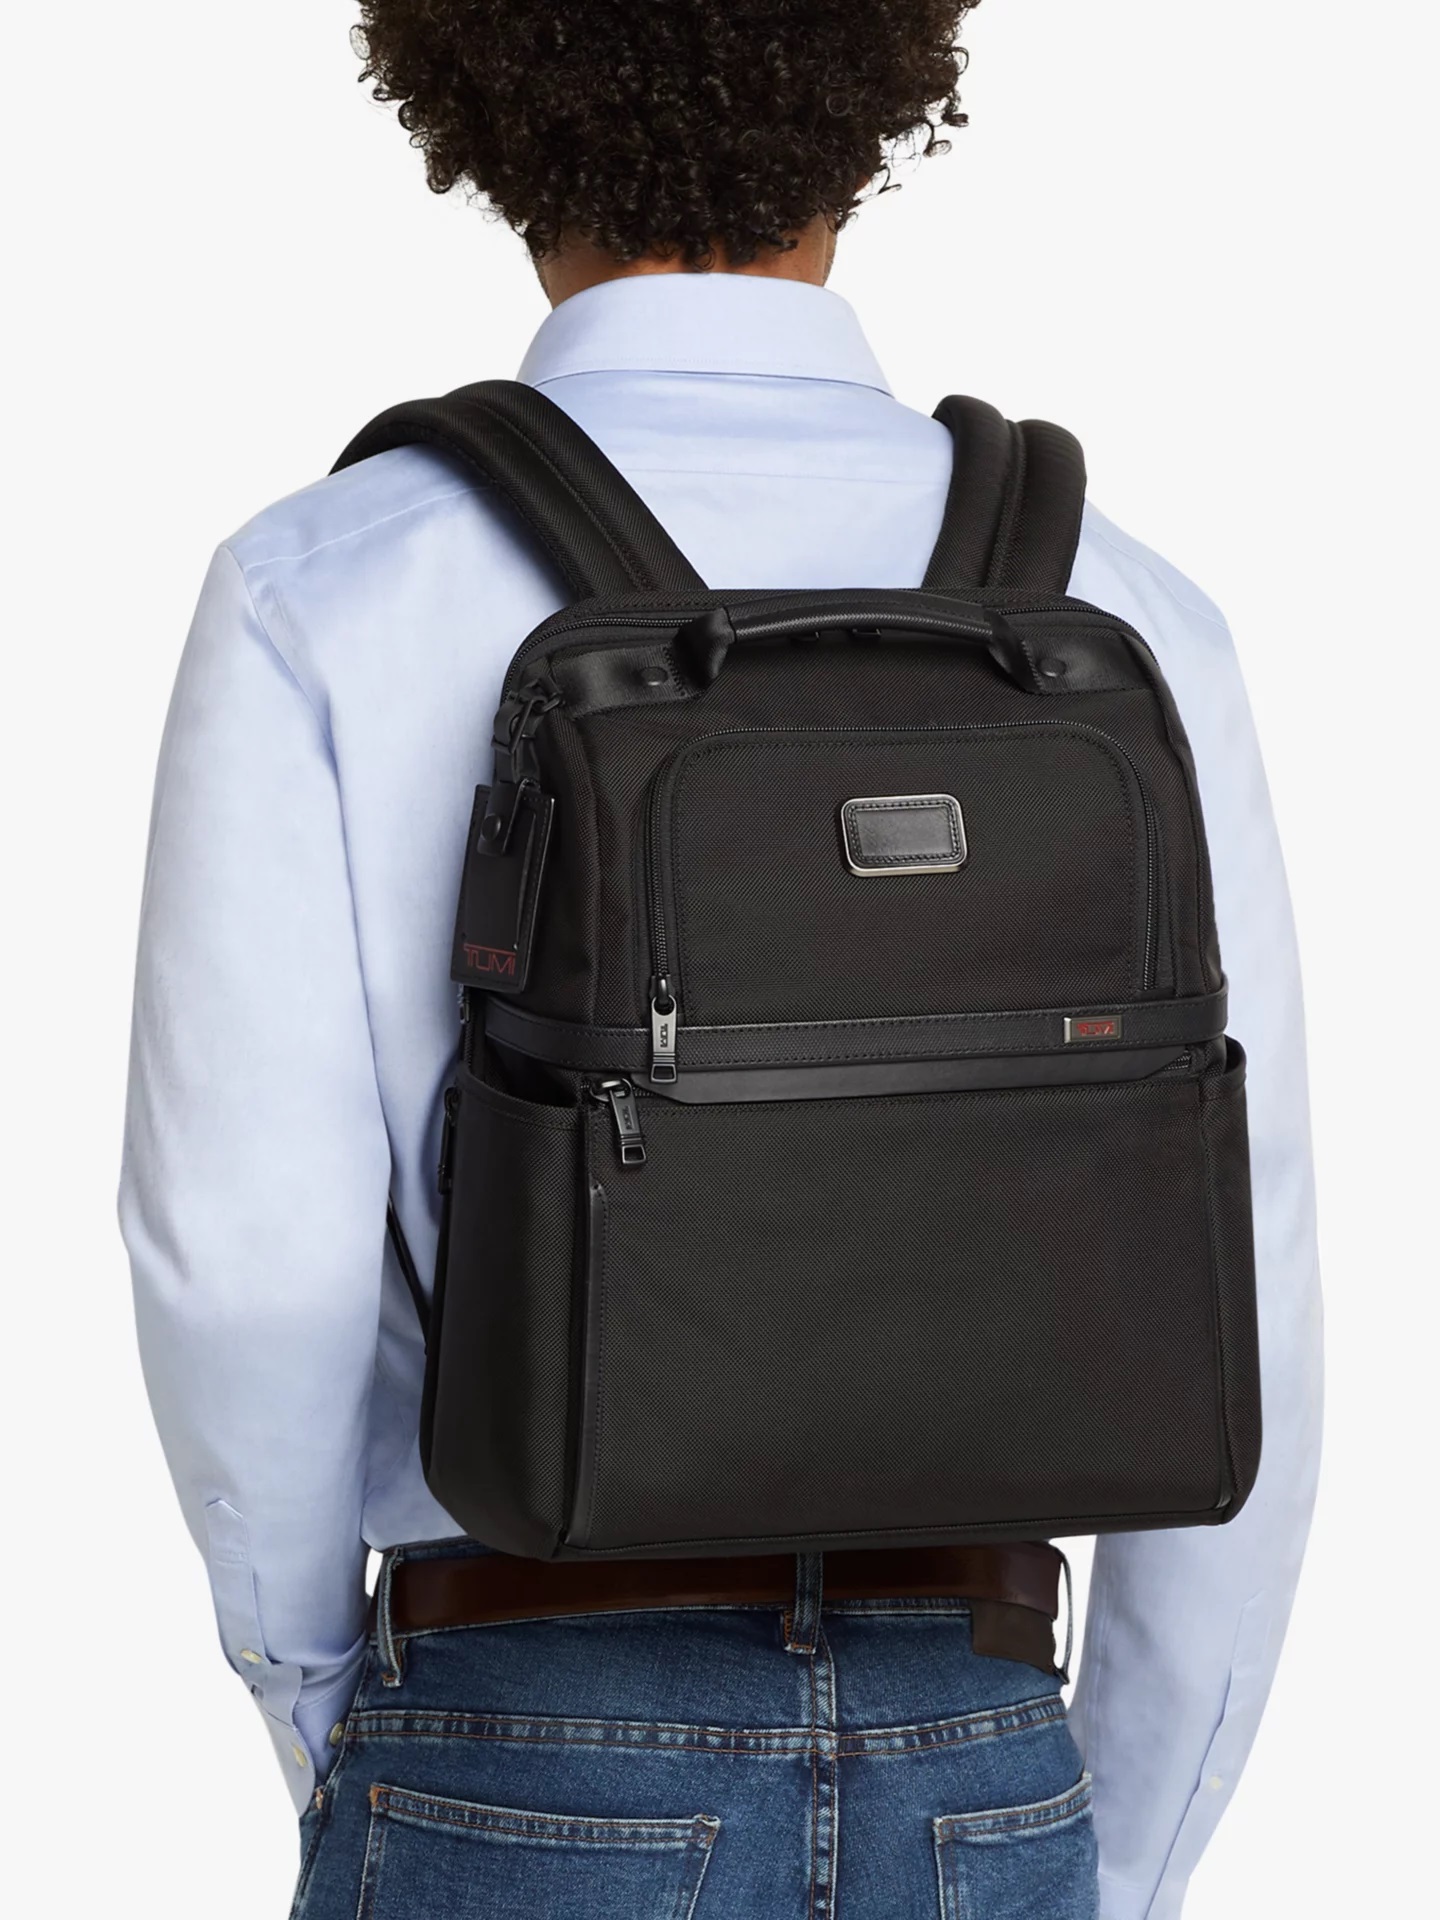 BALO UNISEX LAPTOP TUMI ALPHA SLIM SOLUTIONS BRIEF PACK BACKPACK 3